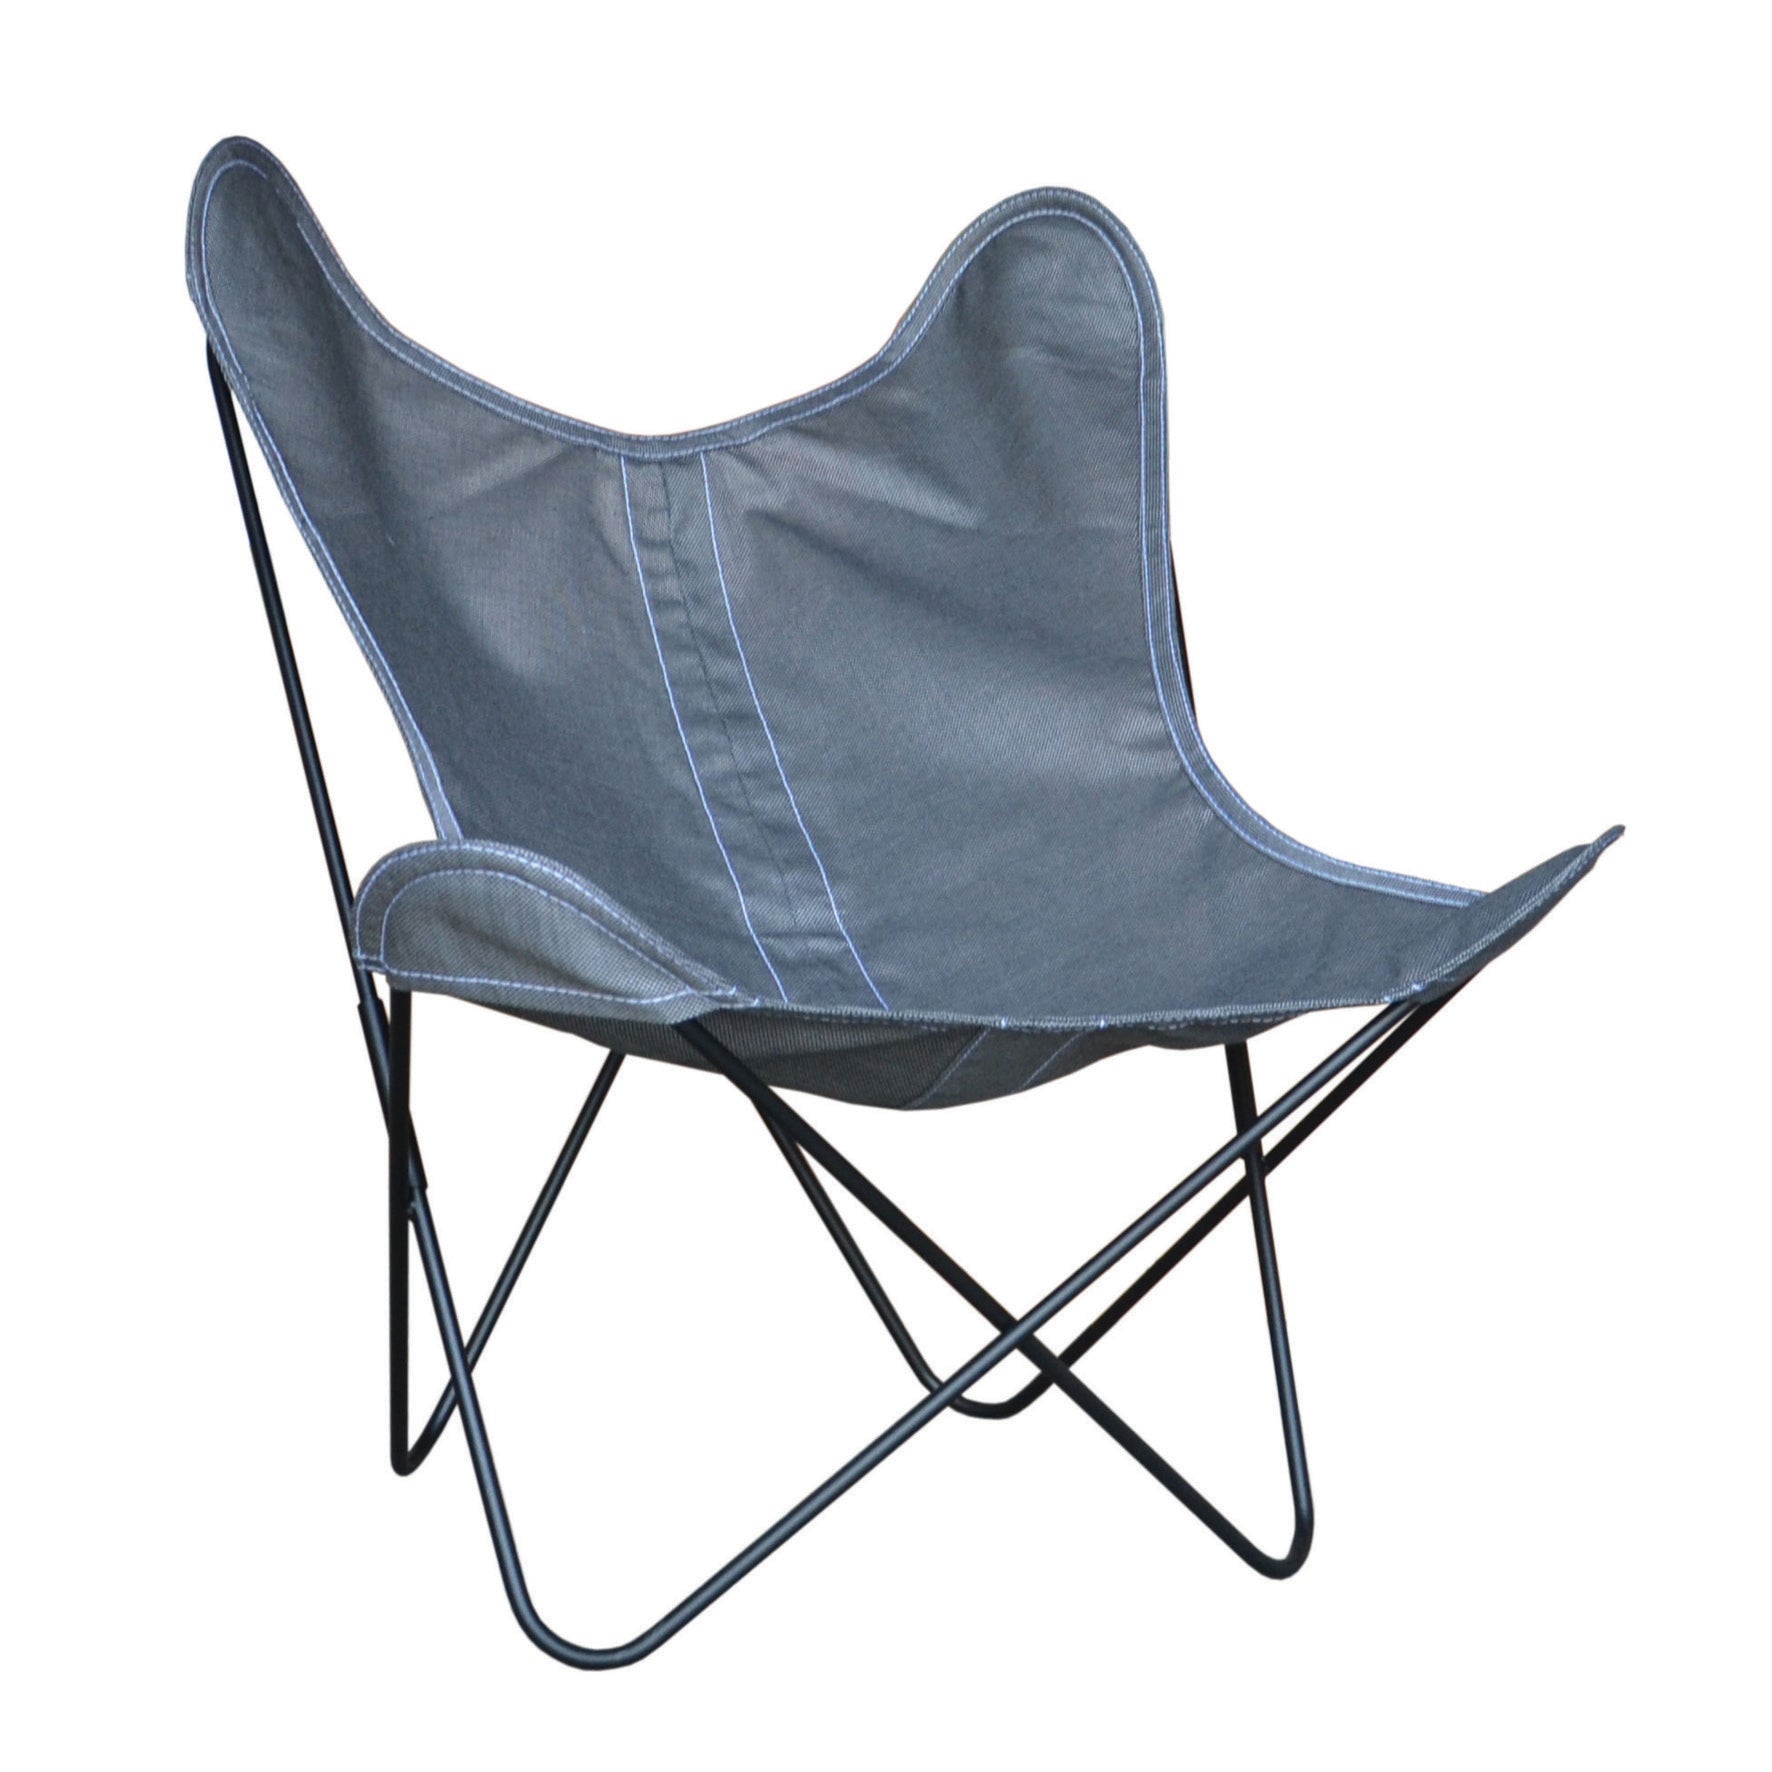 Outdoor Butterfly Chair - Airborne